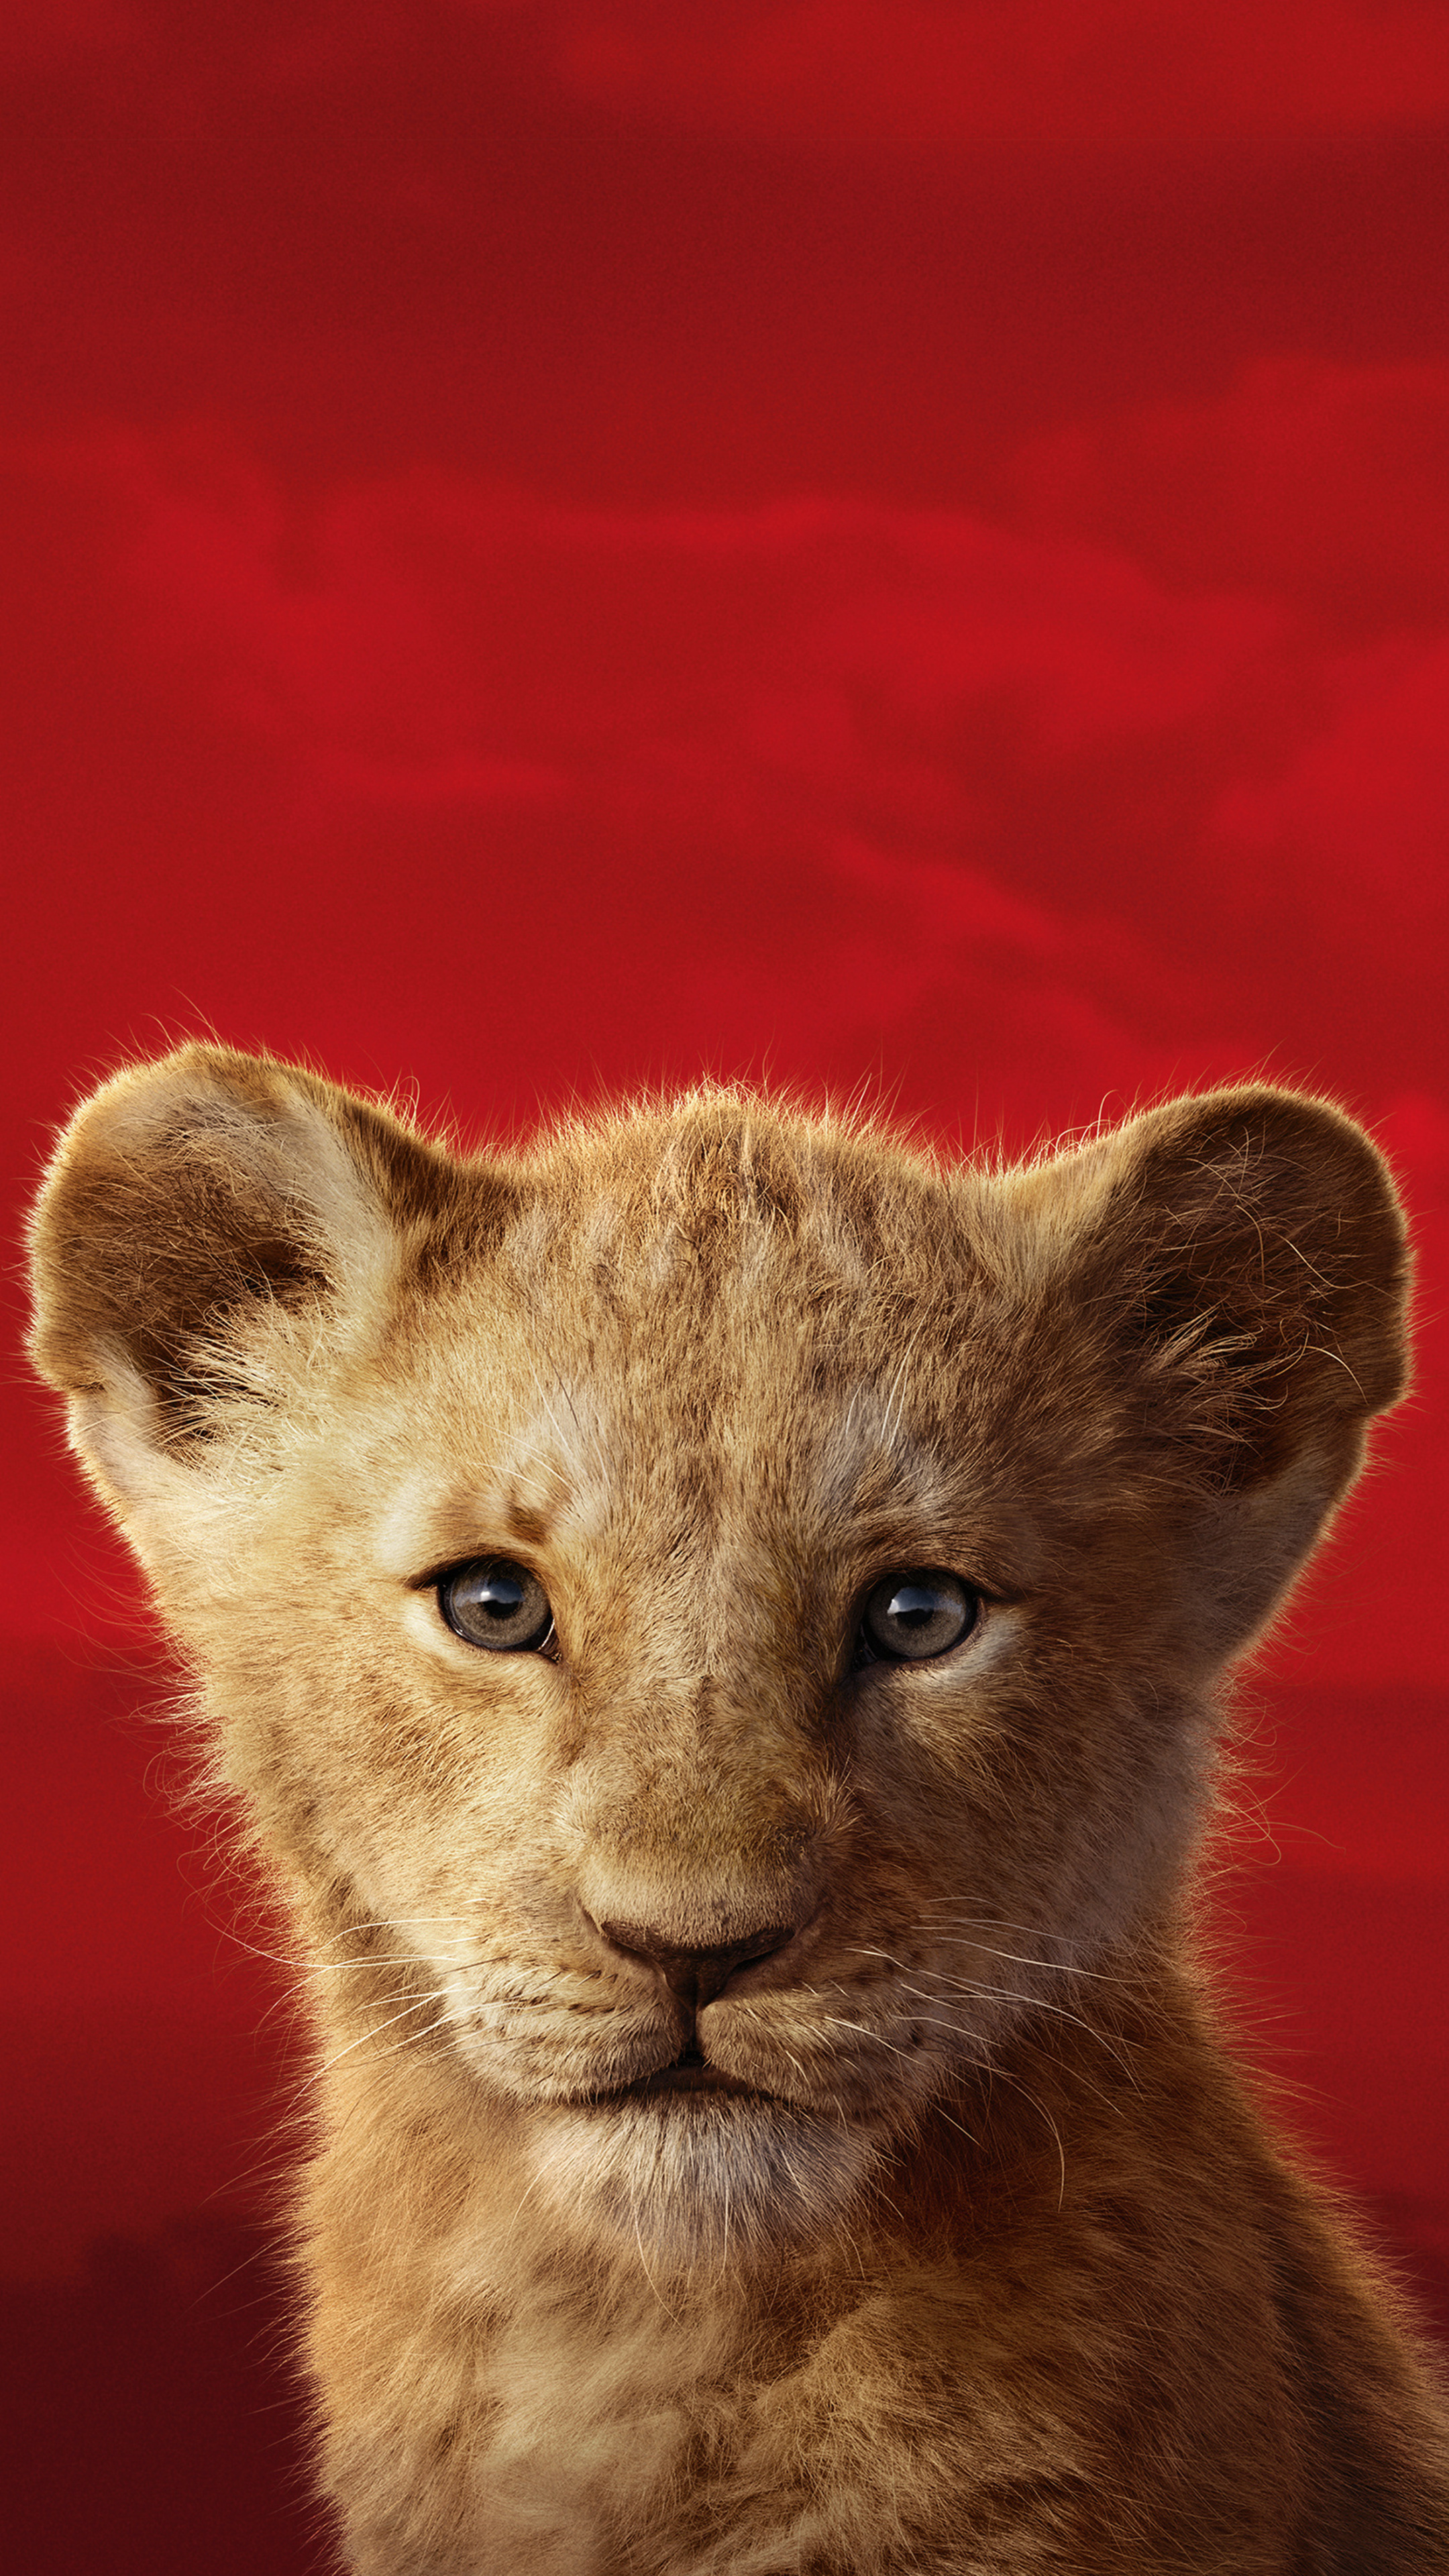 The Lion King, Magnificent 5K resolution, Sony Xperia X, Majestic visuals, 2160x3840 4K Handy